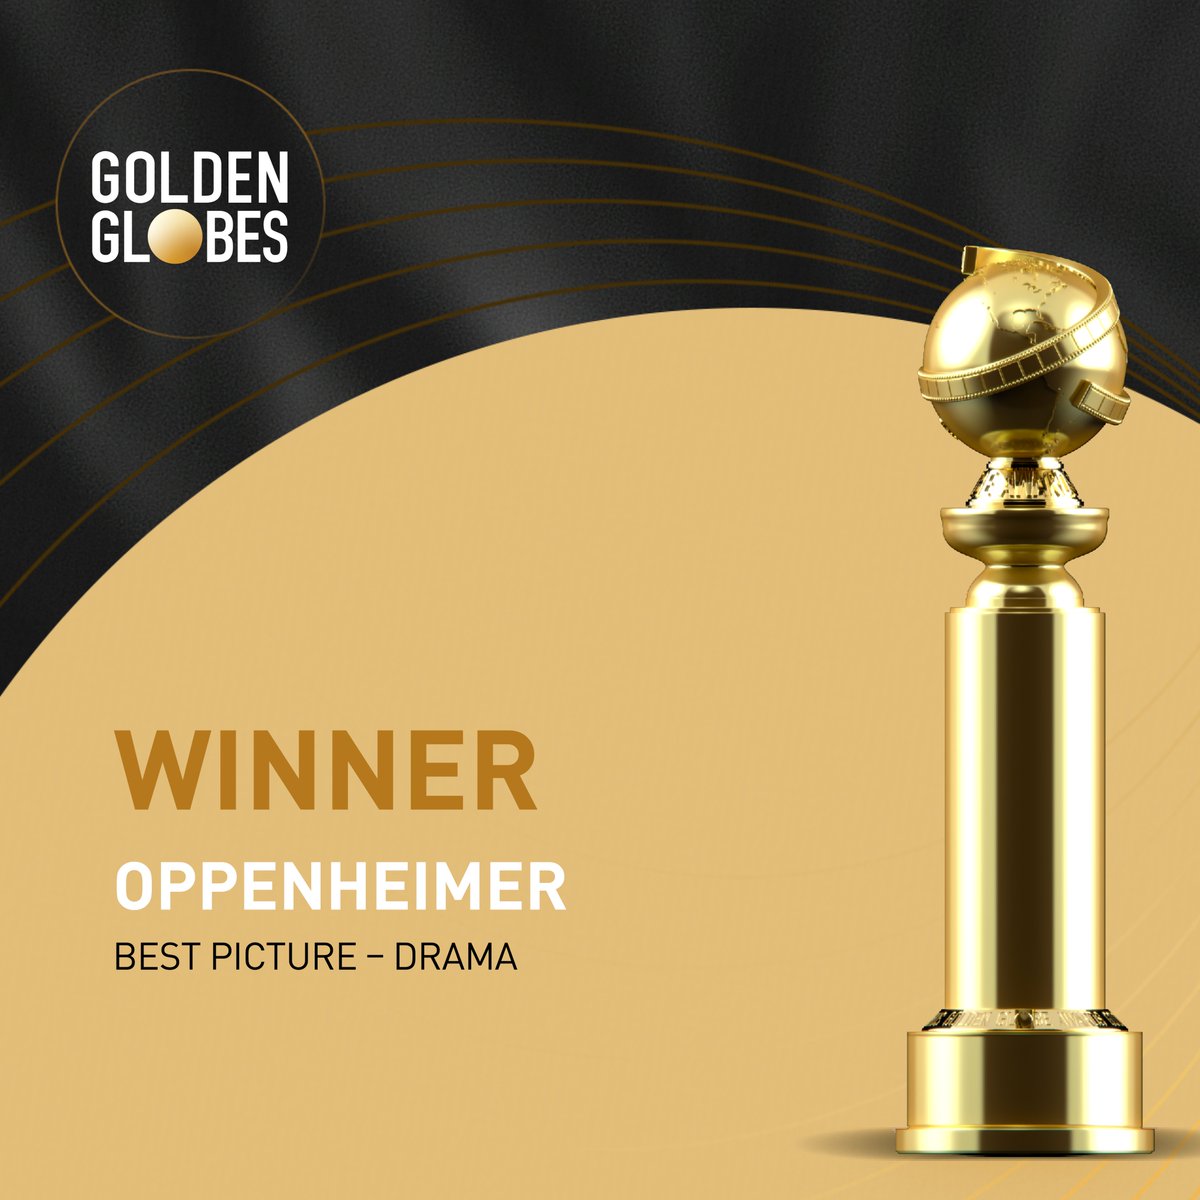 Oppenheimer wins Best Picture - Drama, proving that even in Hollywood, splitting atoms is easier than splitting plastic for recycling!

#GoldenGlobes #Oppenheimer #ecology #nature #earth #recycling #climatechange #Sustainable #Recycle4Nature #environment #MondayMood